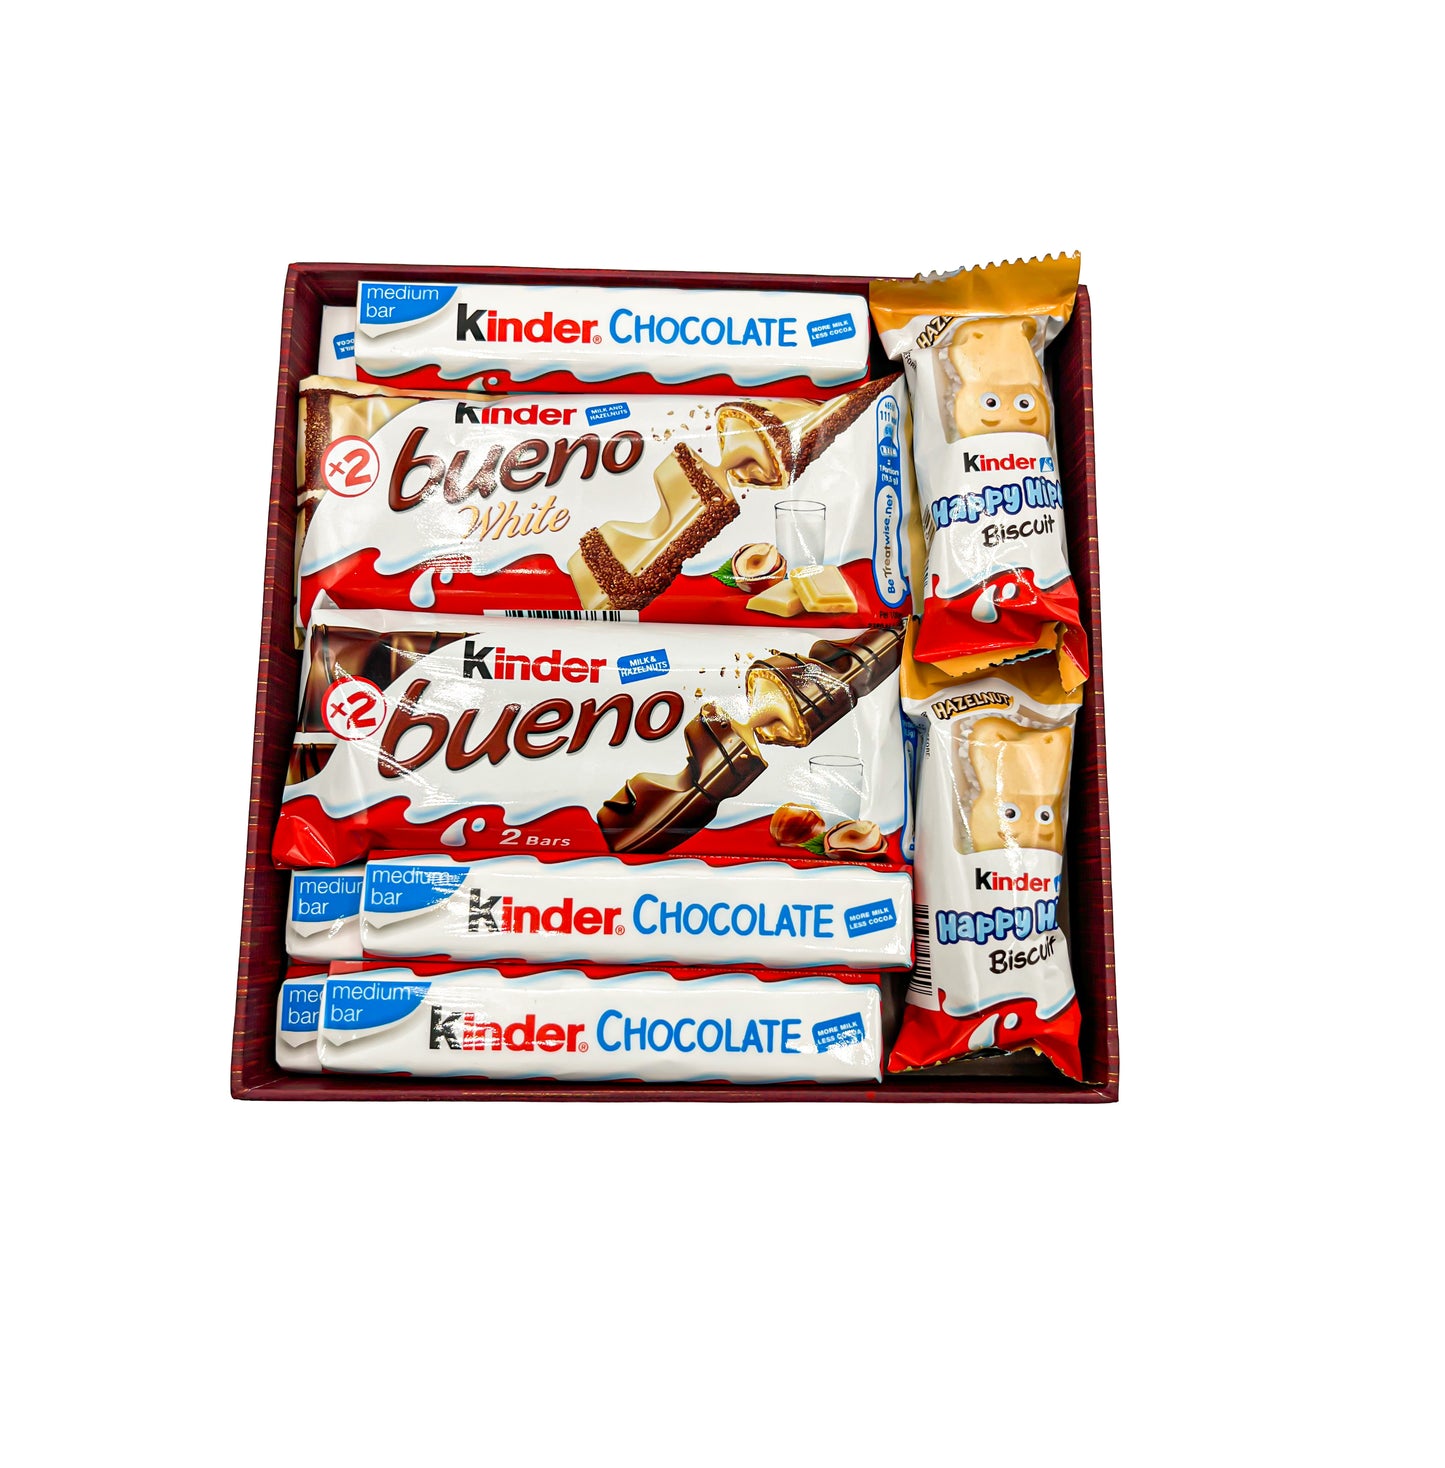 Kinder Bueno Chocolate Box Gift for All Occasions Celebration Gift Hamper - 10 Chocolates